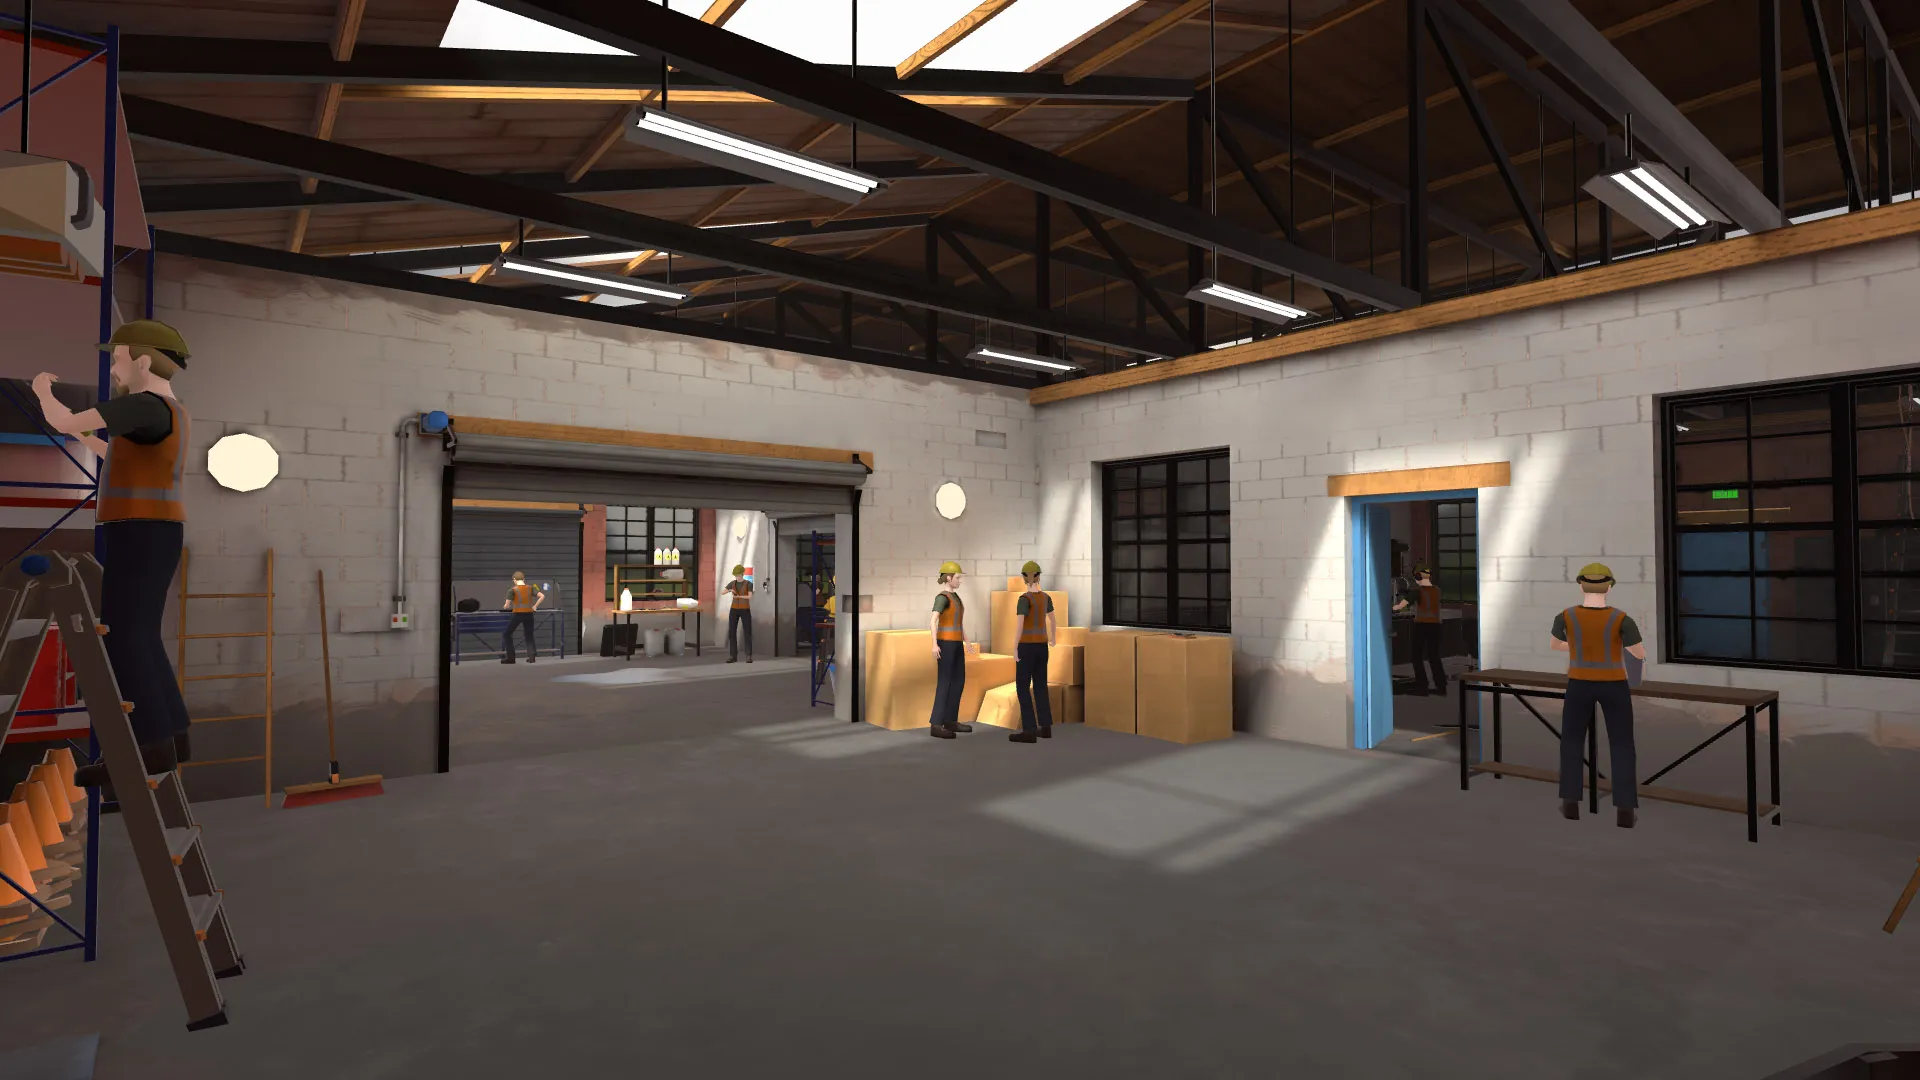 A 3D warehouse full of stuff with workers standing around.